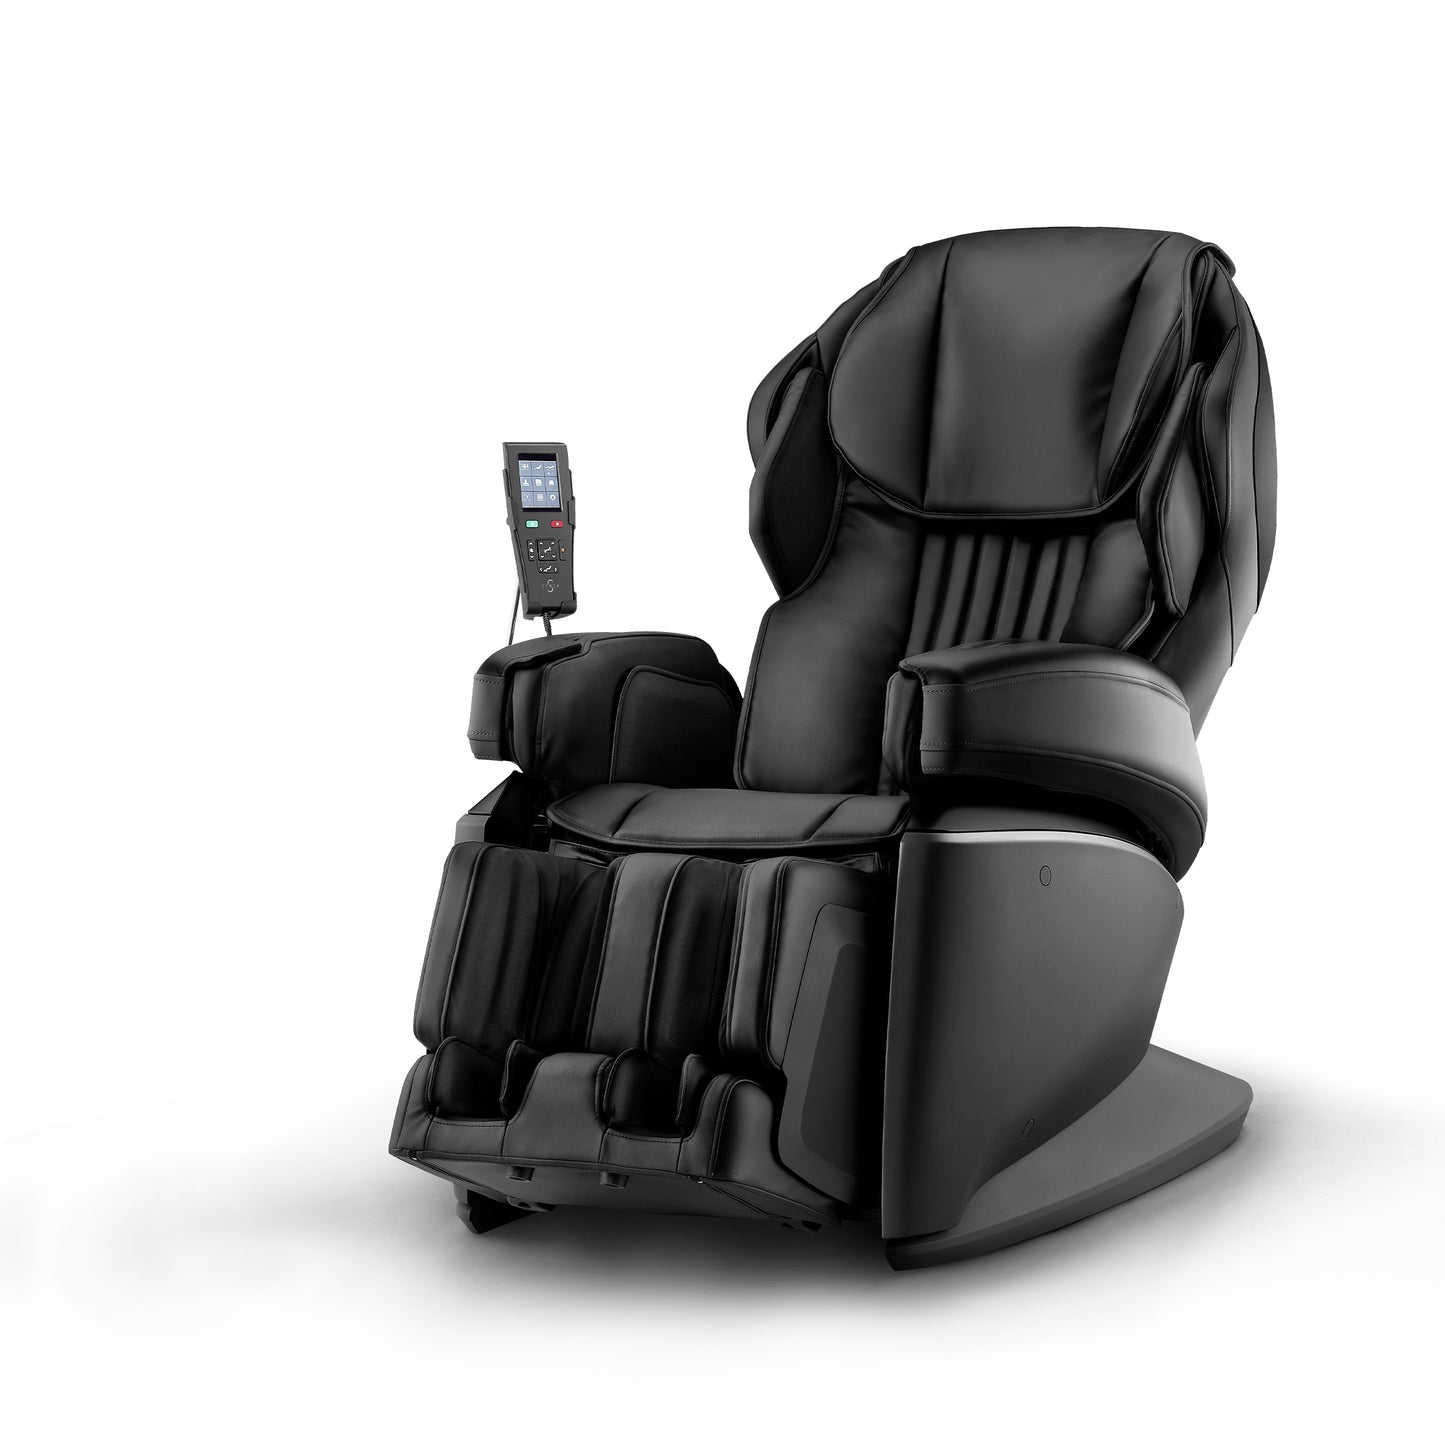 Synca JP-1000 - Made in Japan 4D Ultra Premium Massage chair